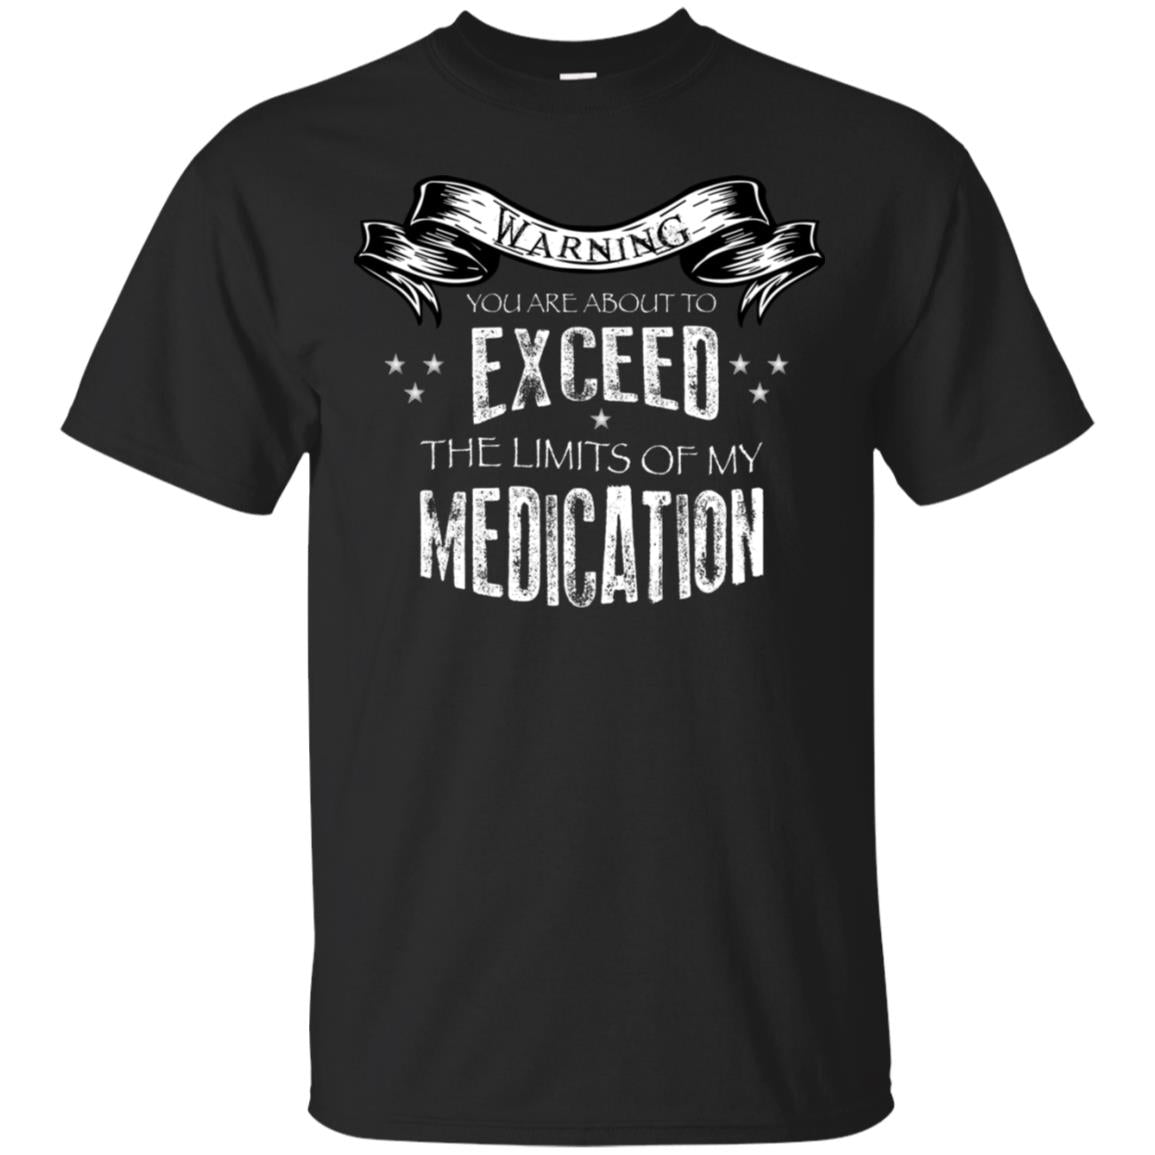 Warning You Are About To Exceed The Limits Of My Medication ShirtG200 Gildan Ultra Cotton T-Shirt